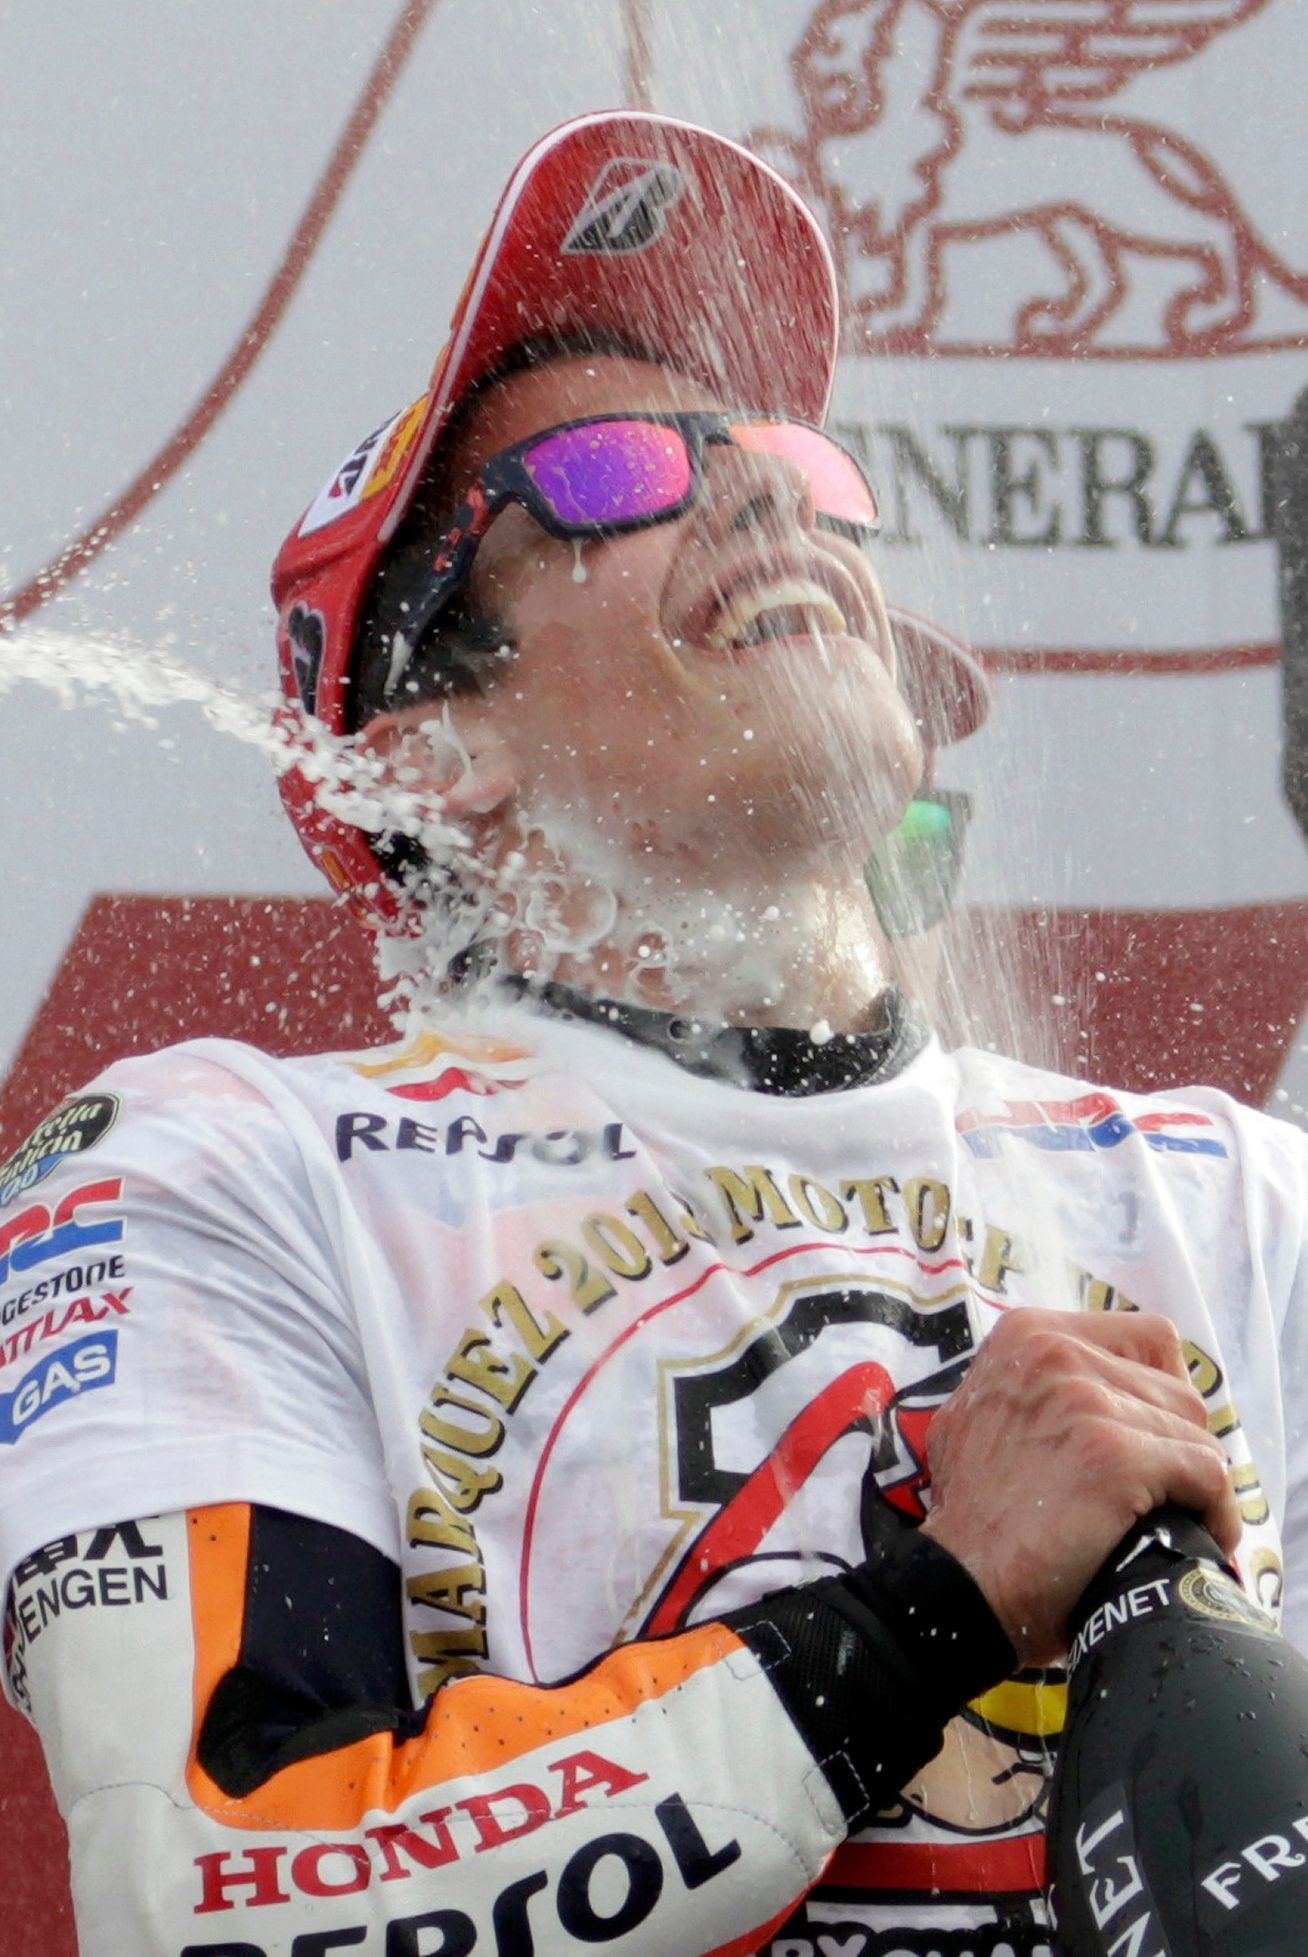 Honda MotoGP rider Spanish Marquez celebrates on podium after becoming the youngest MotoGP world champion at the end of the Valencia Motorcycle Grand Pri in Cheste